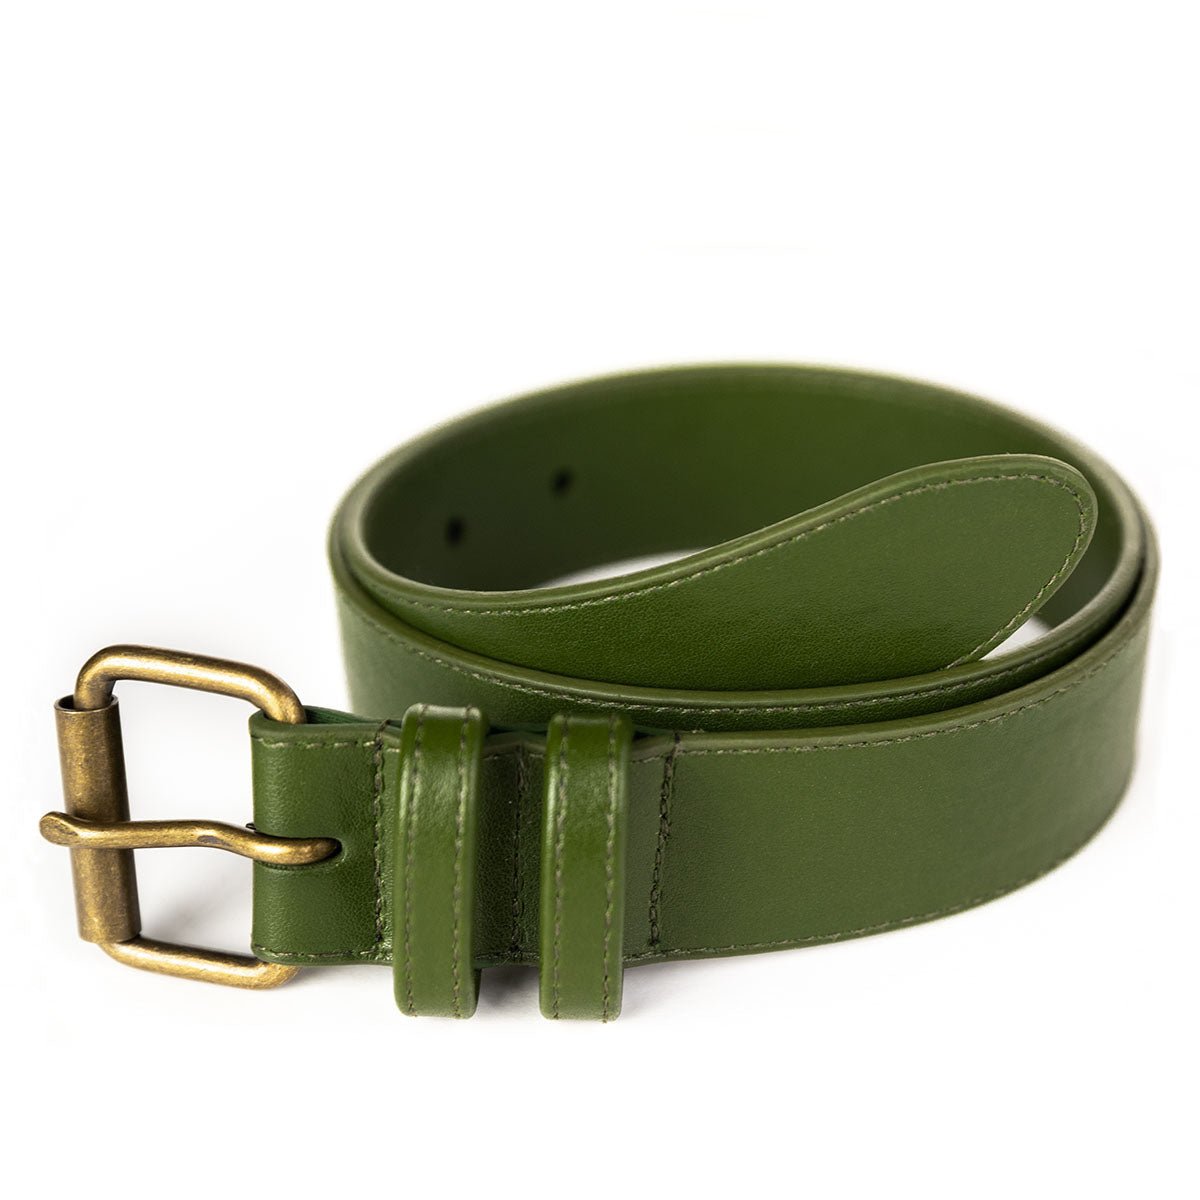 Cactus Country Womens Belt